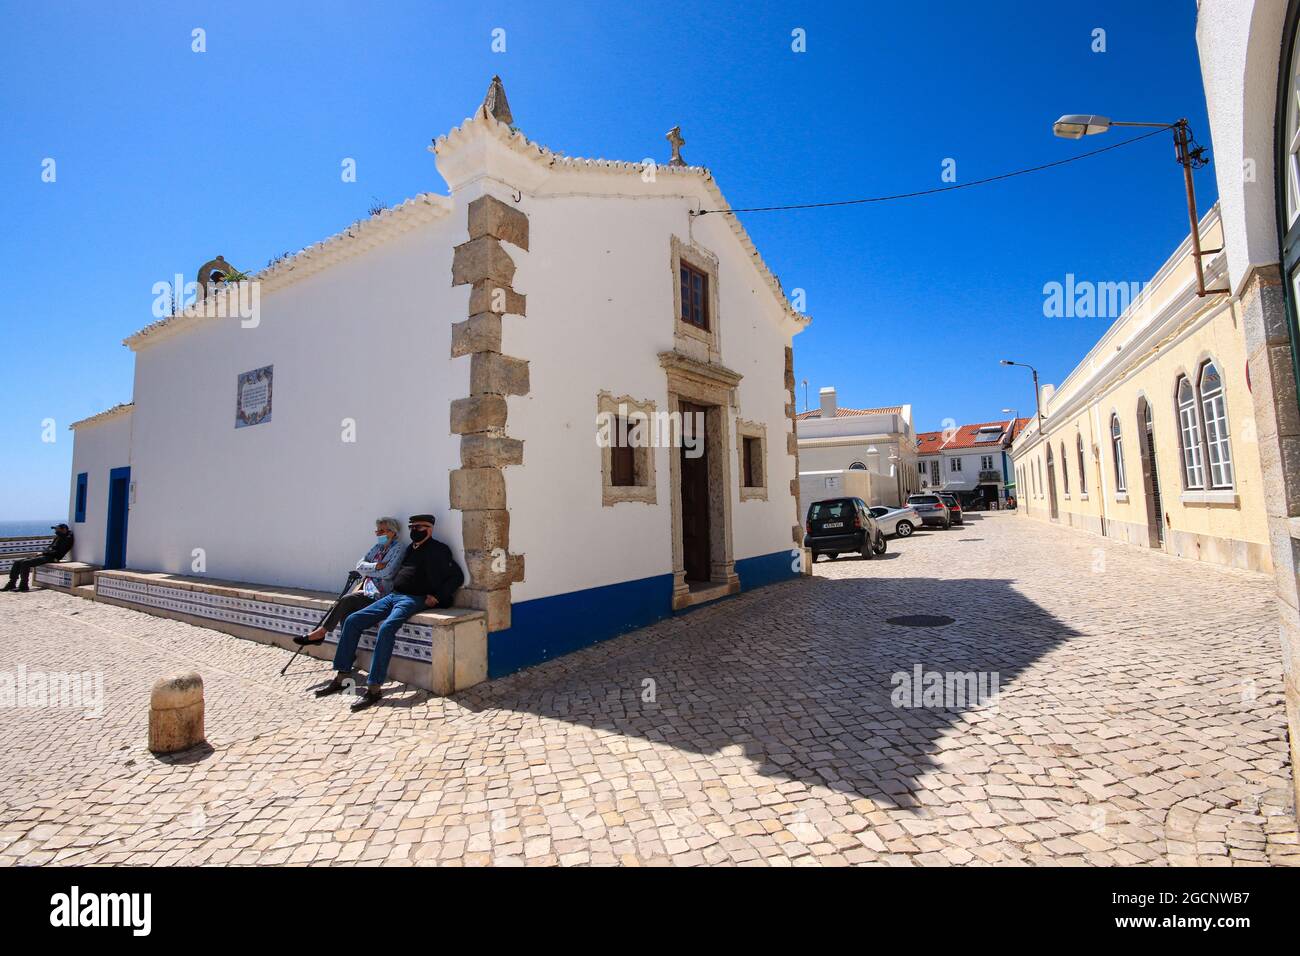 ERICEIR, PORTUGAL - Jun 25, 2021: Small chapel in the village of Ericeira, Portugal. June 2021 Stock Photo